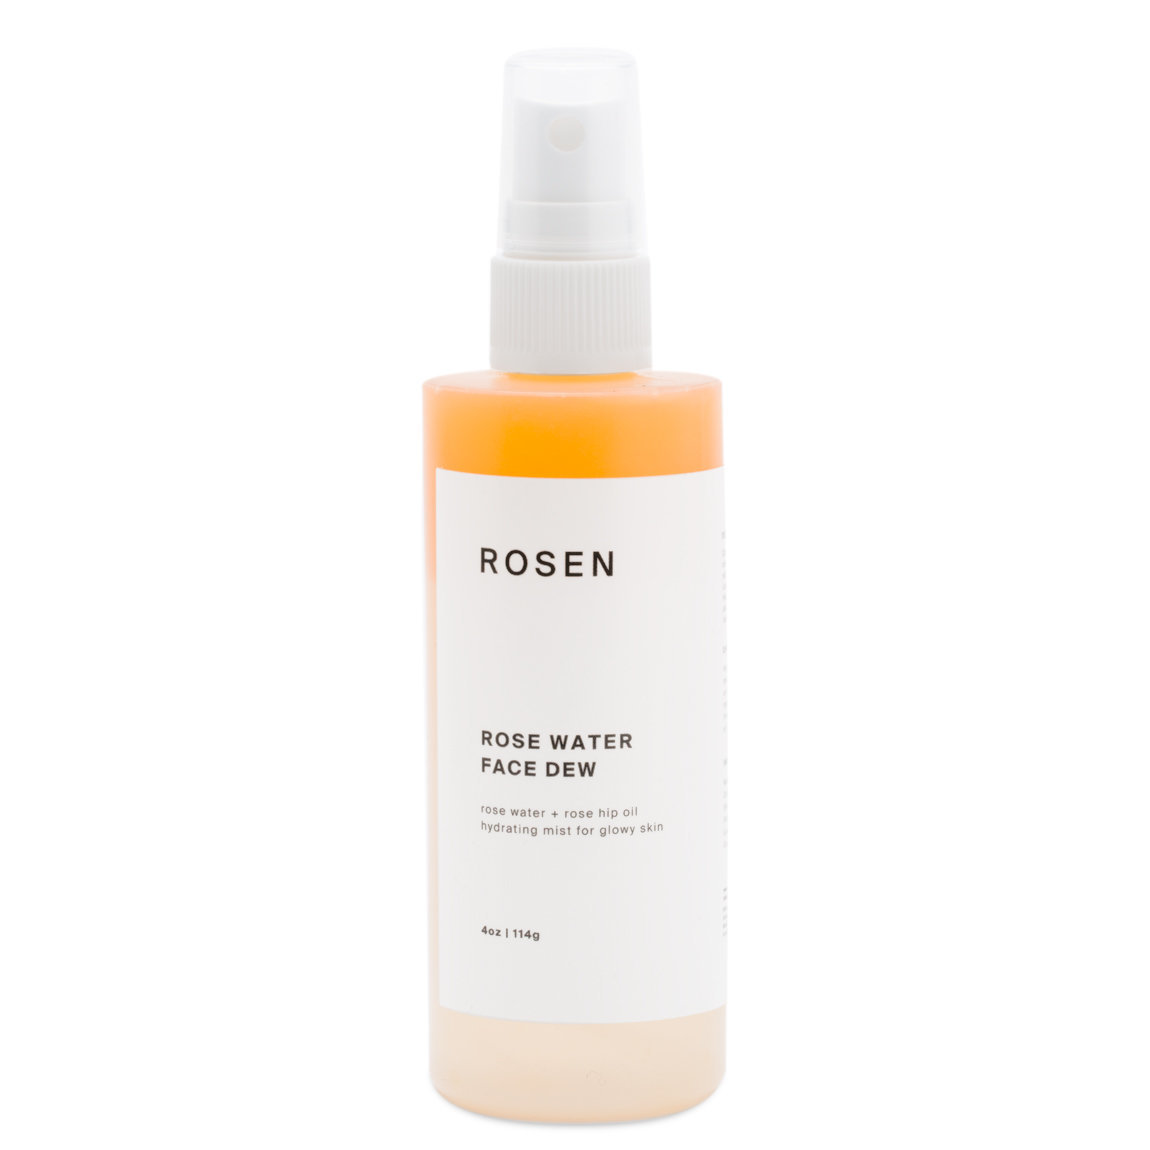 ROSEN Skincare Rose Water Face Dew 4 oz alternative view 1 - product swatch.